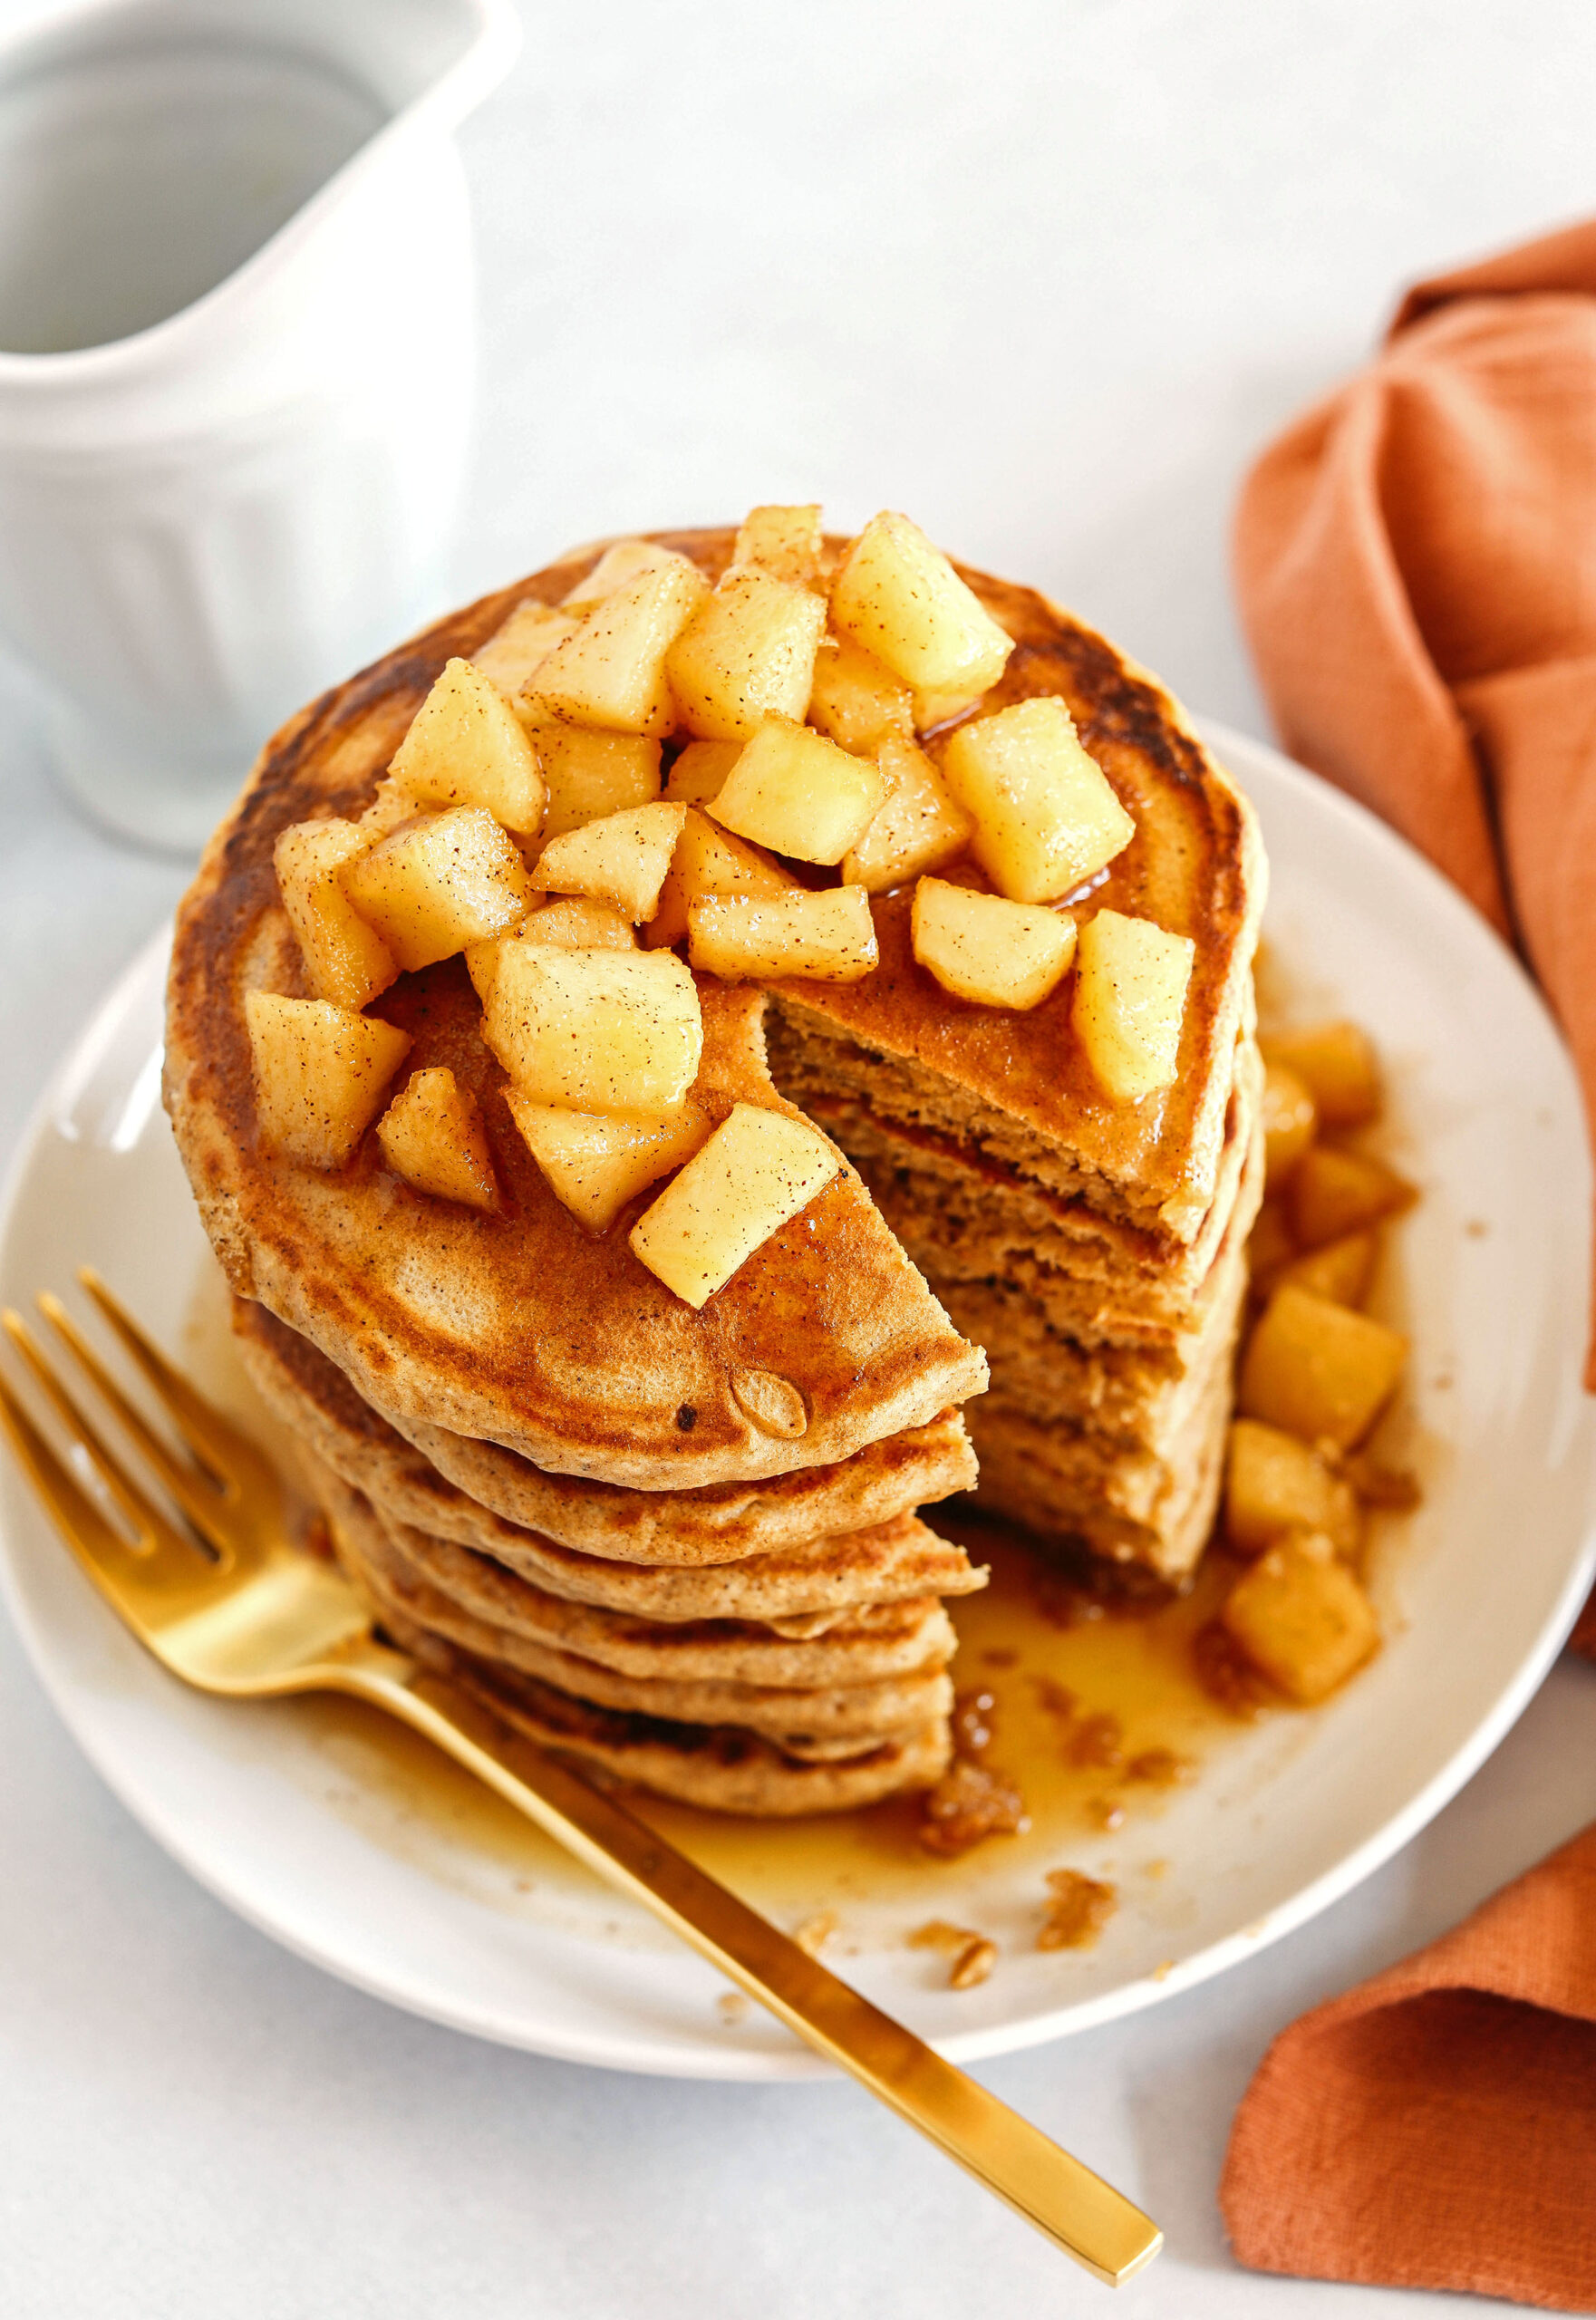 Light and fluffy Apple Cinnamon Pancakes made healthier with whole wheat flour, applesauce in place of oil and zero butter or refined sugar!  Topped with warm spiced apples and drizzled with maple syrup!